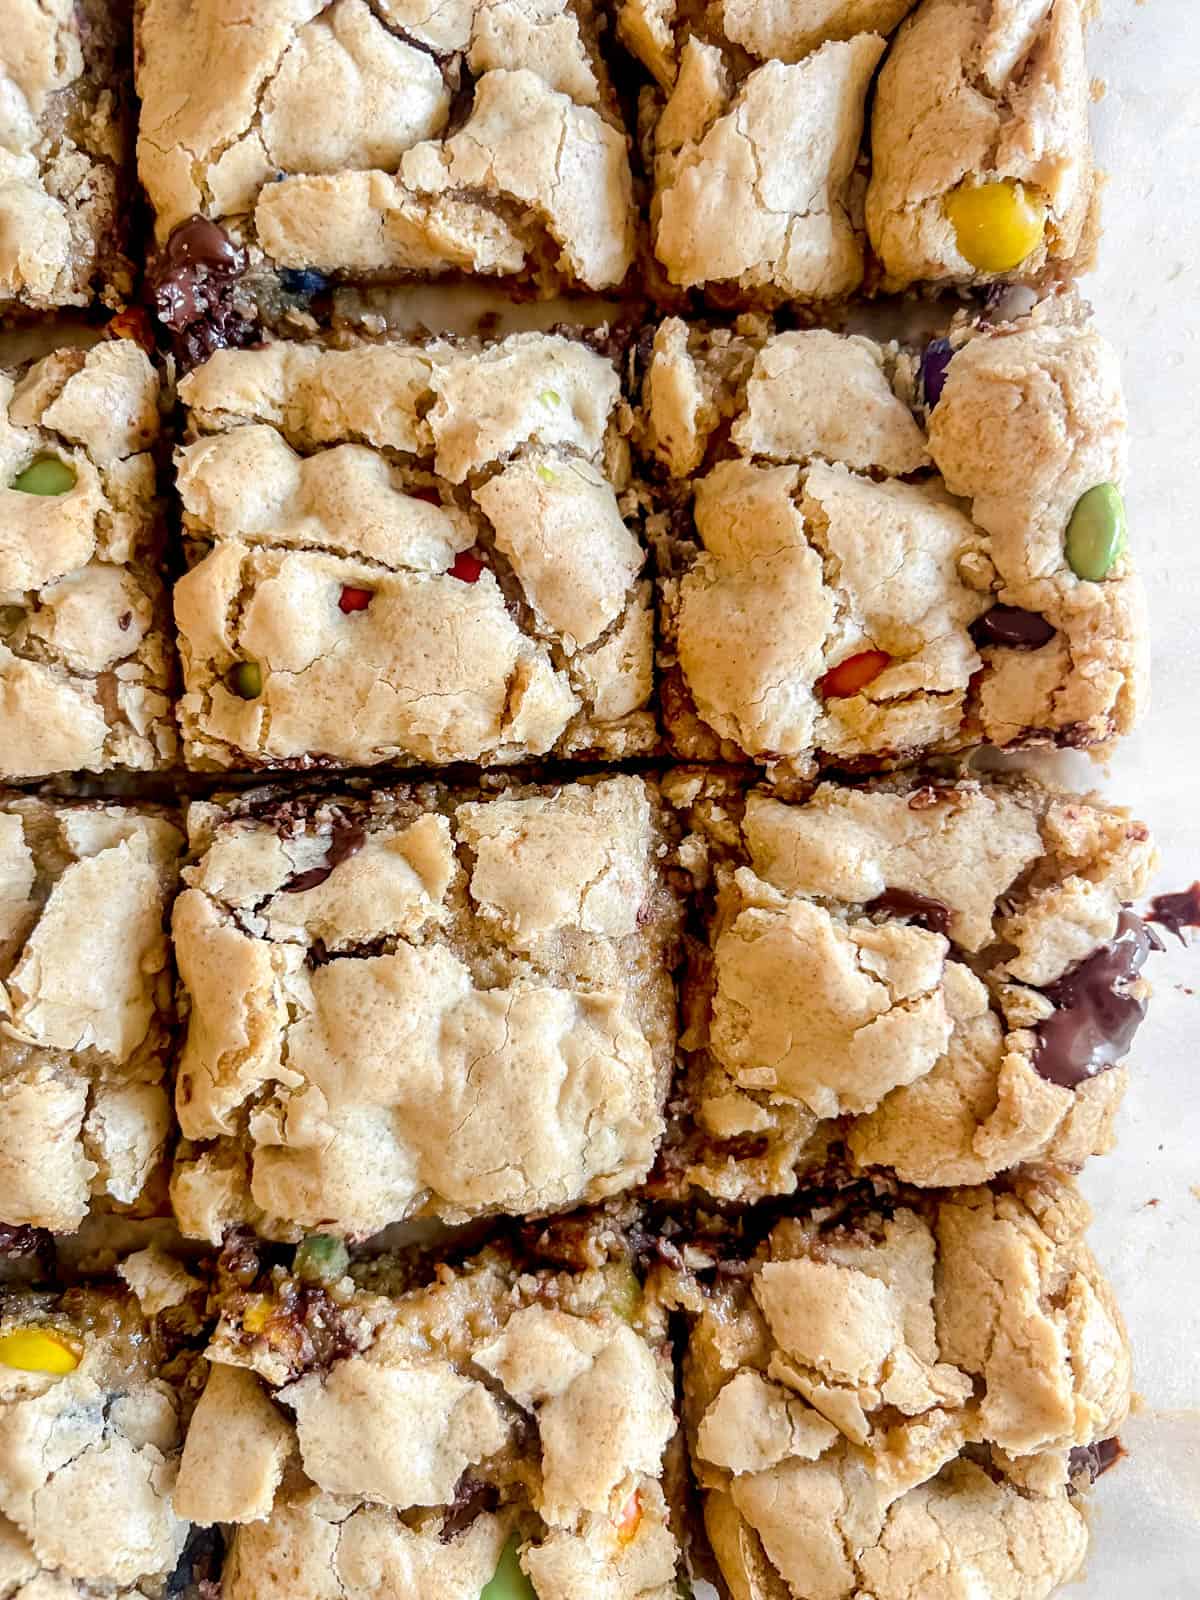 Gluten free cookie bars cooked less.